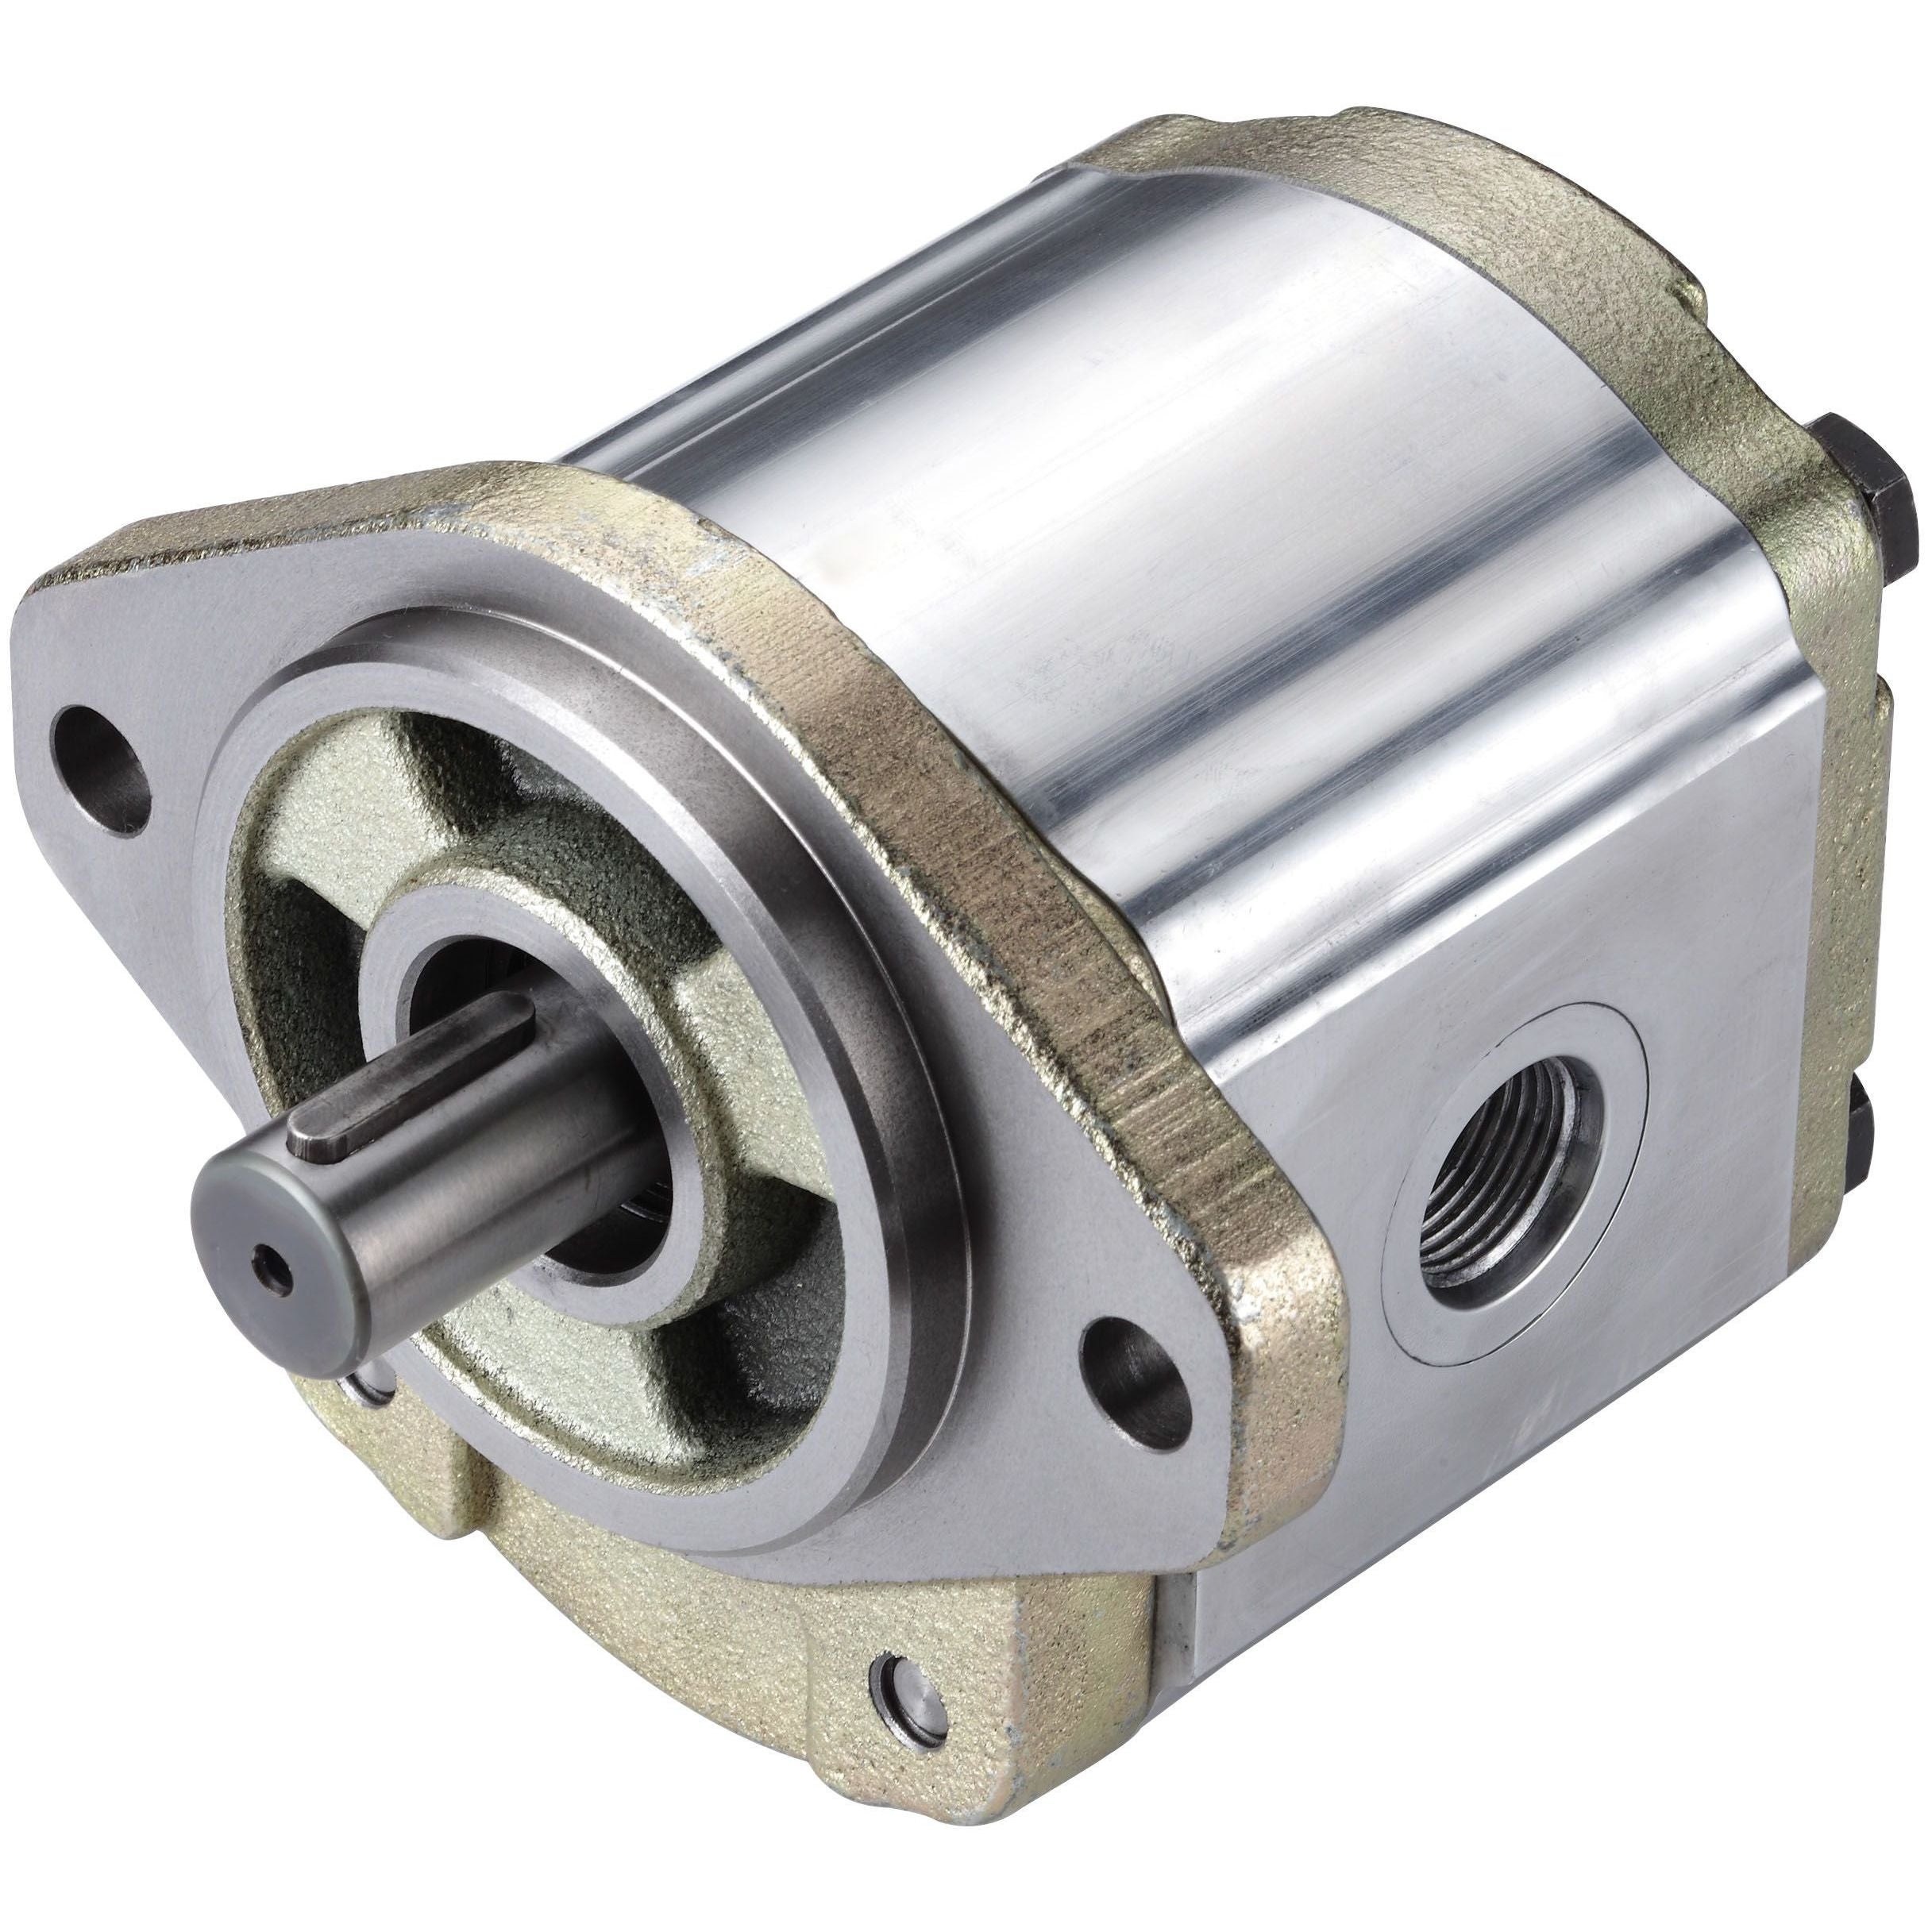 3GB8U225L : Honor Gear Pump, CCW Rotation, 25cc (1.53in3), 11.89 GPM, 3500psi, 3000 RPM, #20 SAE (1.25") In, #12 SAE (3/4") Out, Splined Shaft 13-Tooth, 16/32 Pitch, SAE B 2-Bolt Mount